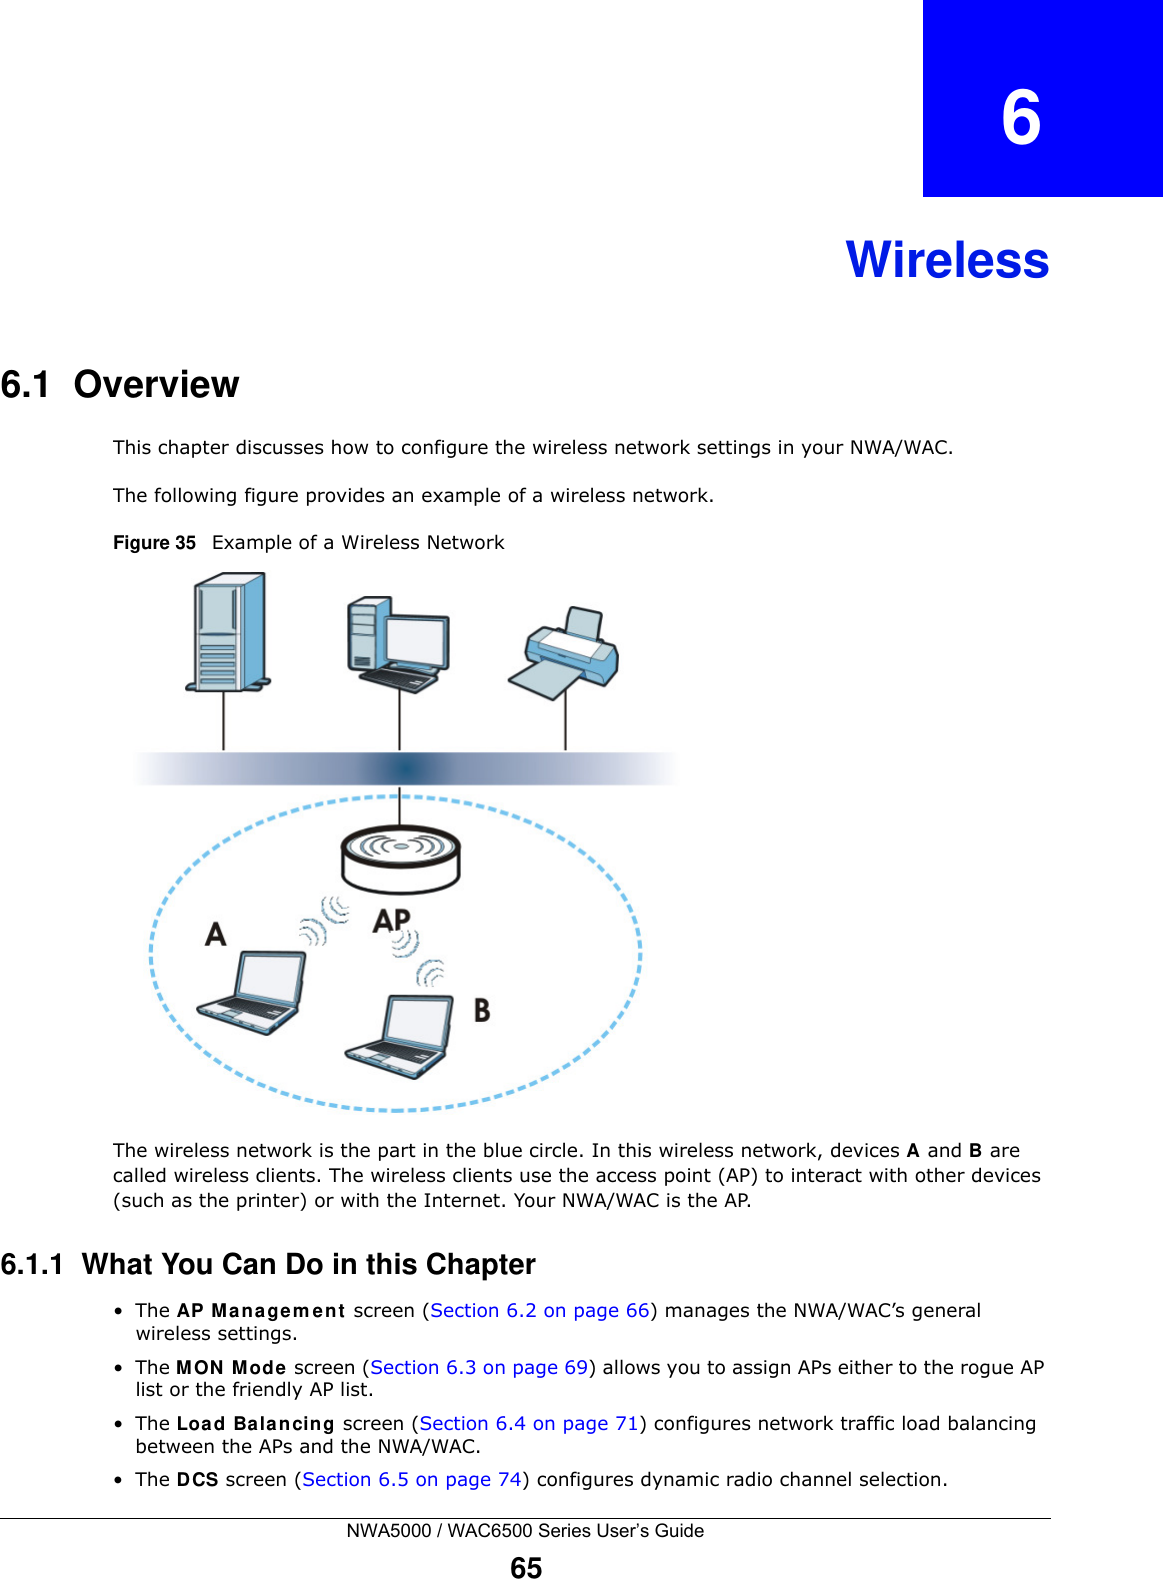 NWA5000 / WAC6500 Series User’s Guide65CHAPTER   6Wireless6.1  OverviewThis chapter discusses how to configure the wireless network settings in your NWA/WAC. The following figure provides an example of a wireless network.Figure 35   Example of a Wireless NetworkThe wireless network is the part in the blue circle. In this wireless network, devices A and B are called wireless clients. The wireless clients use the access point (AP) to interact with other devices (such as the printer) or with the Internet. Your NWA/WAC is the AP.6.1.1  What You Can Do in this Chapter•The AP M ana gem en t screen (Section 6.2 on page 66) manages the NWA/WAC’s general wireless settings.•The MON Mode screen (Section 6.3 on page 69) allows you to assign APs either to the rogue AP list or the friendly AP list.•The Load Balancing screen (Section 6.4 on page 71) configures network traffic load balancing between the APs and the NWA/WAC. •The DCS screen (Section 6.5 on page 74) configures dynamic radio channel selection.